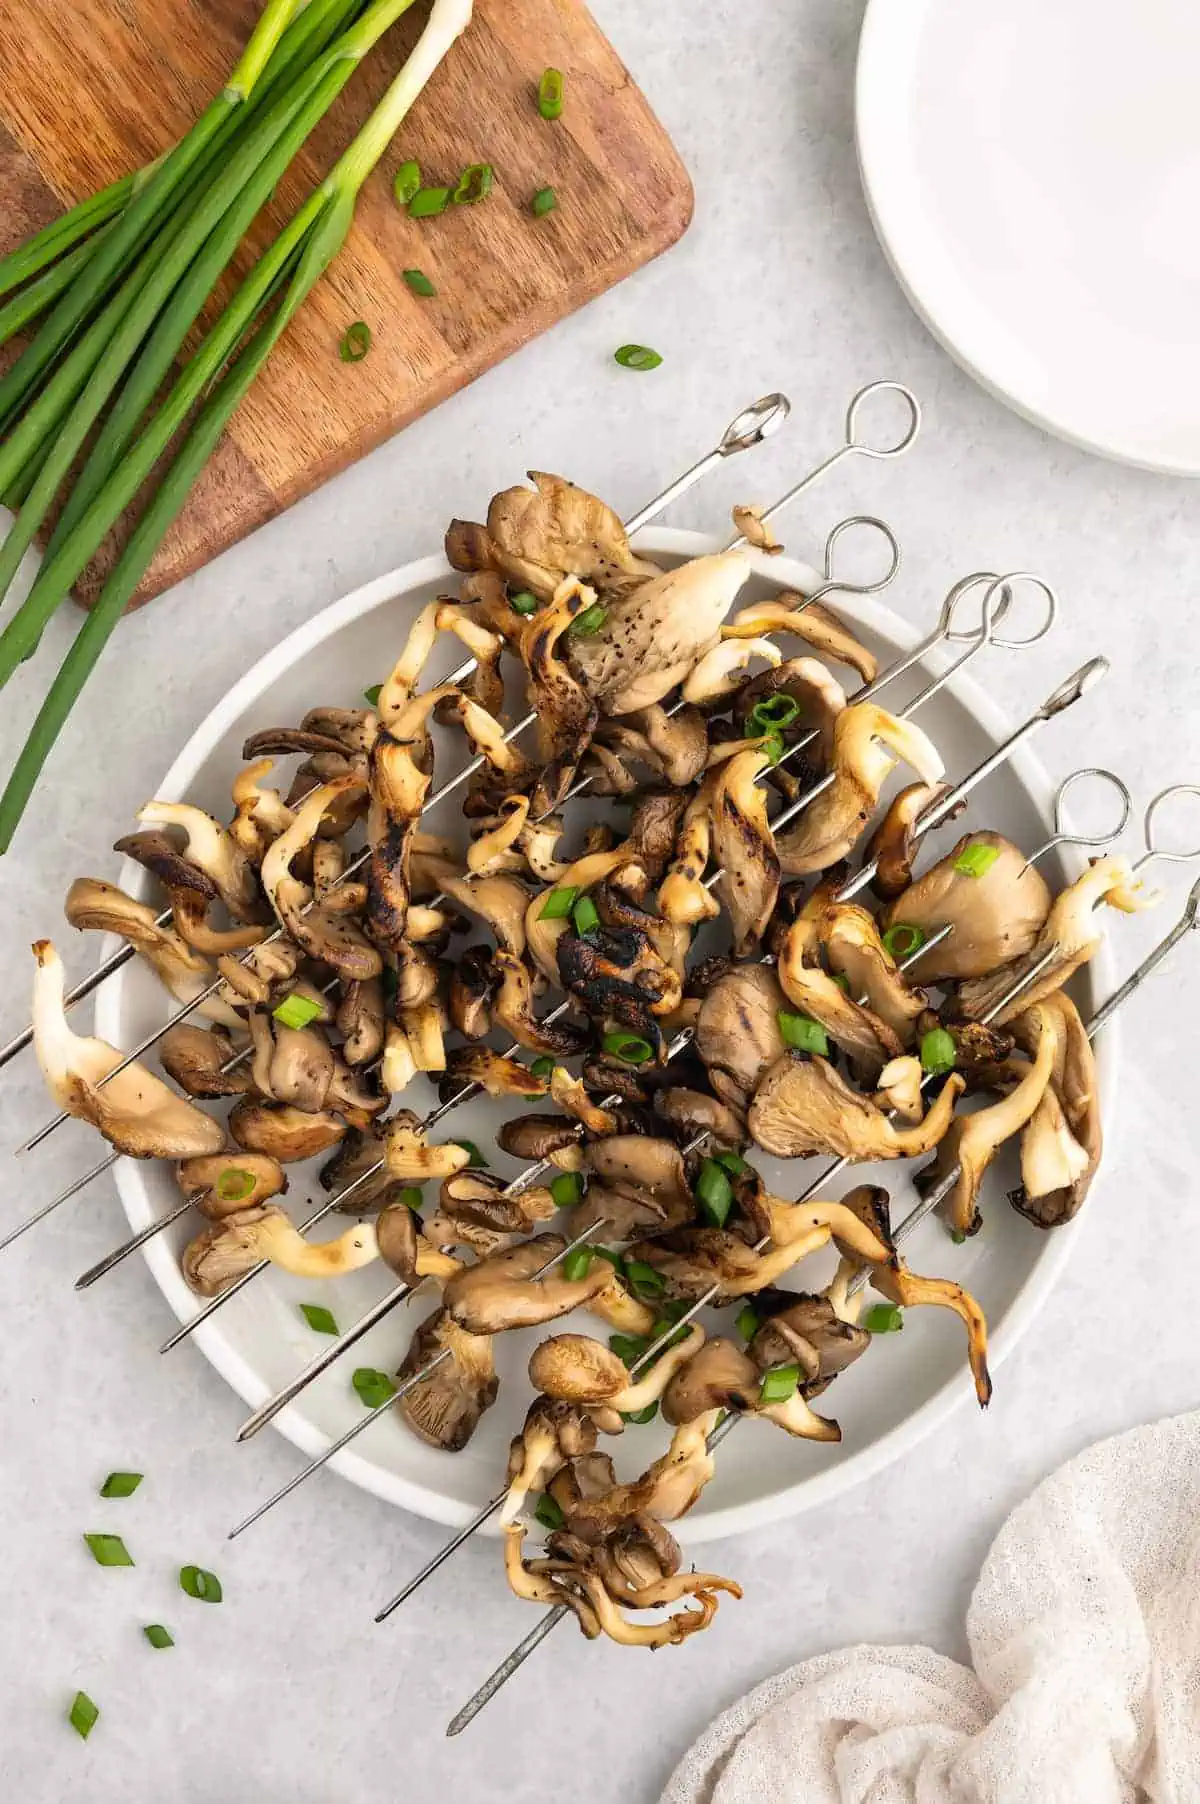 A plate of grilled mushroom skewers with green onions.